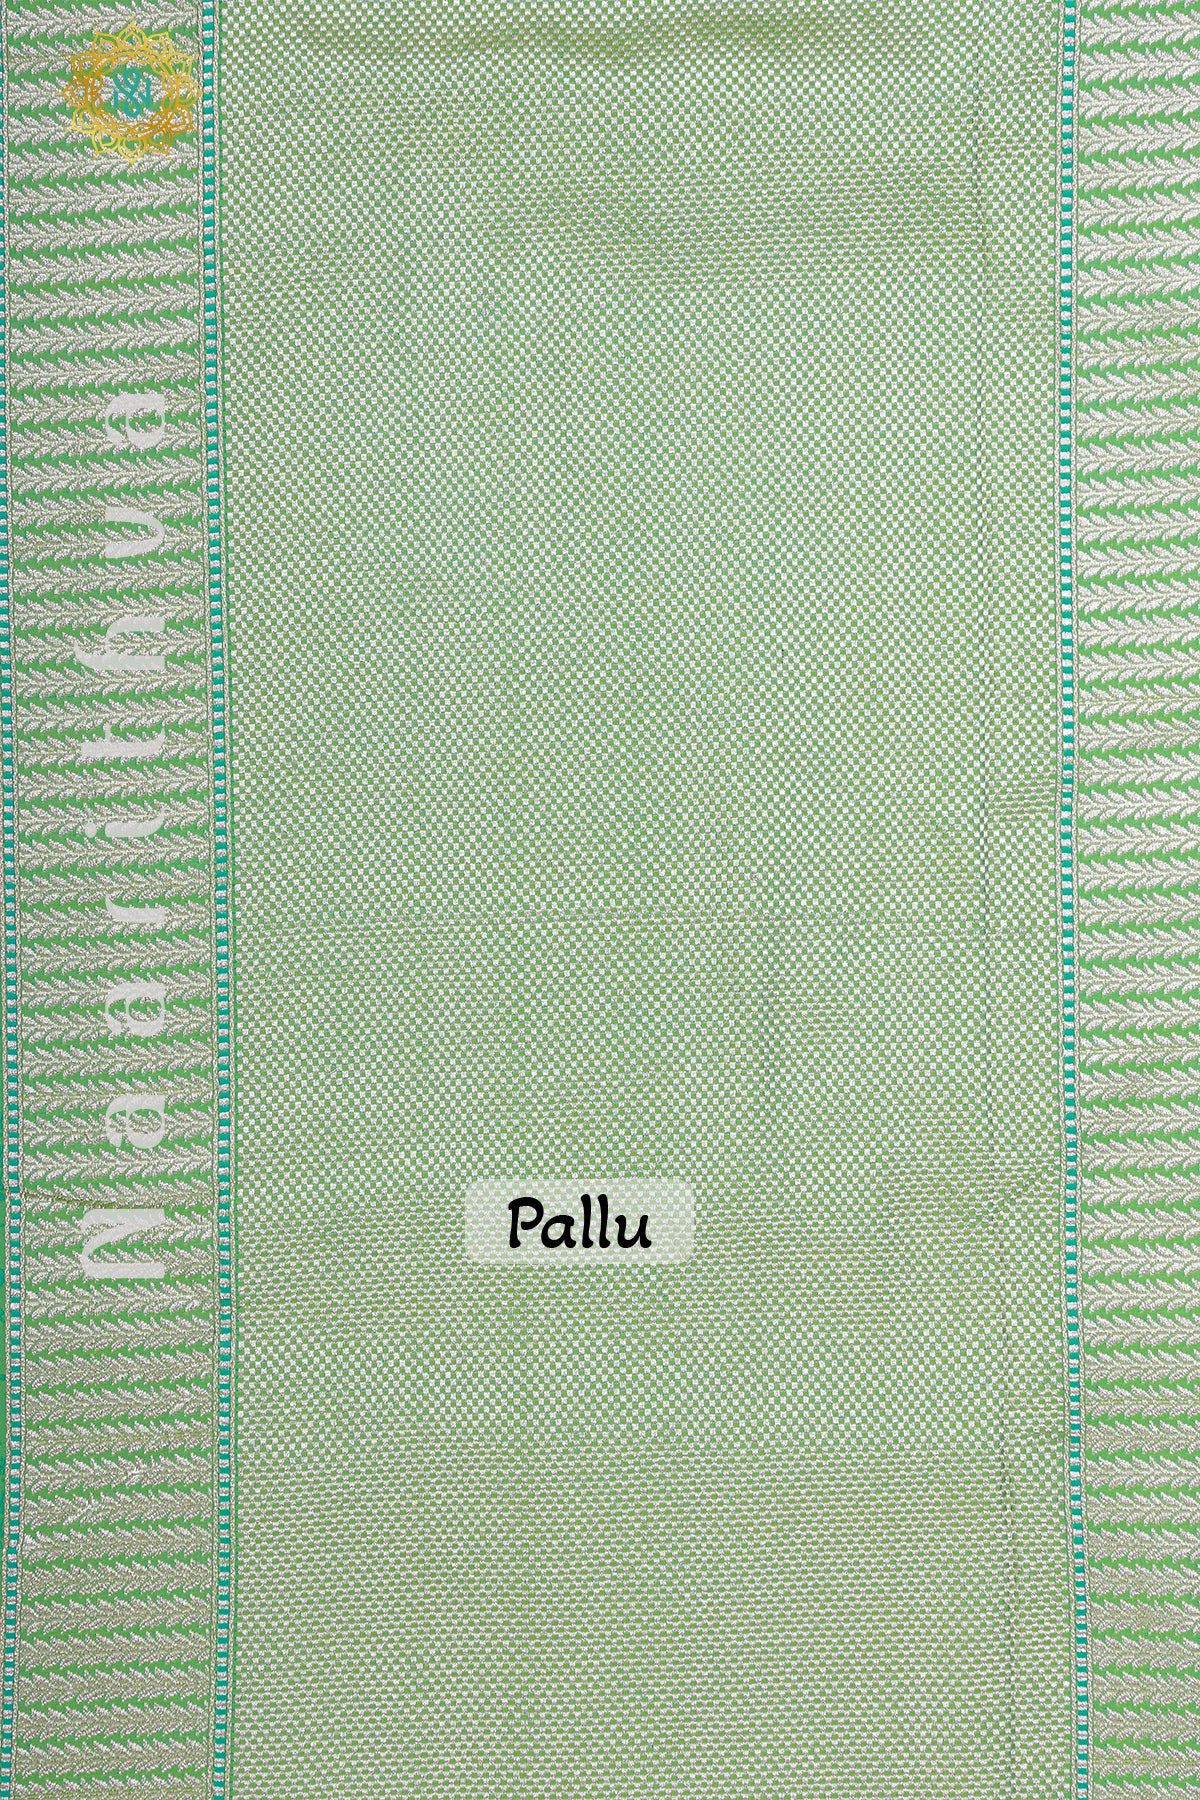 GREEN - SATIN SILK WITH TANCHOI WEAVING